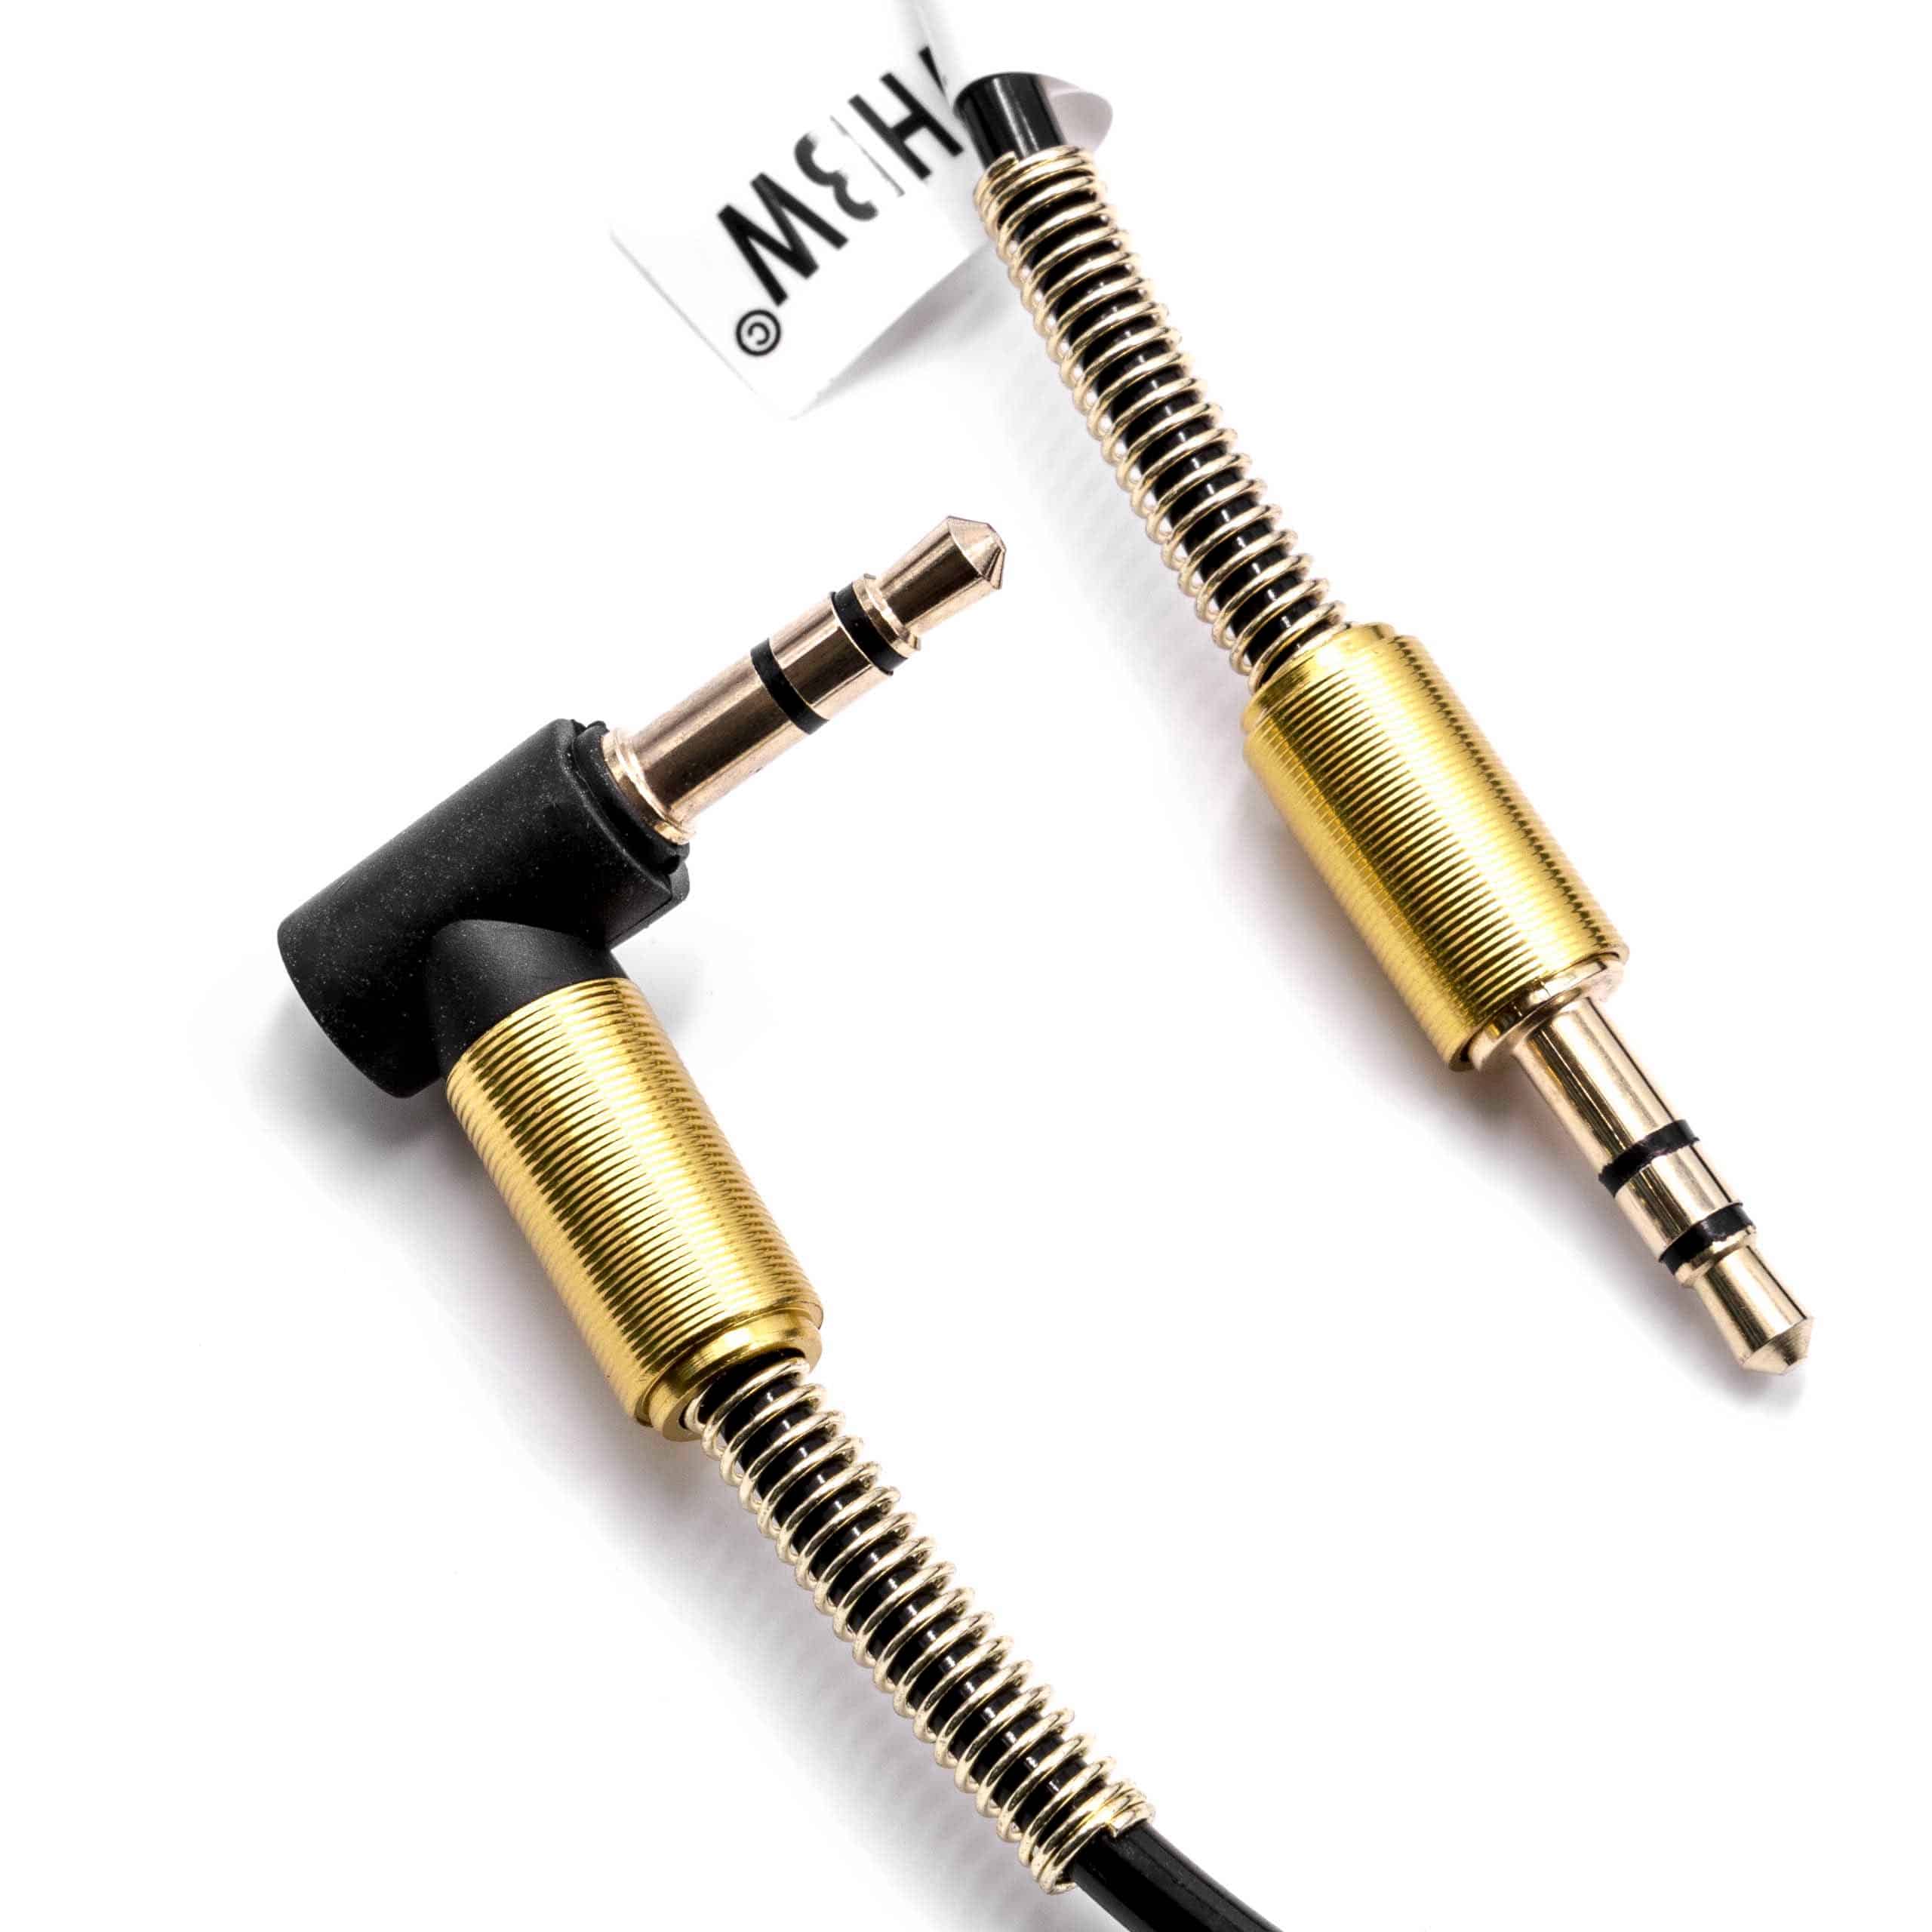 Stereo AUX Audio Cable Jack Adapter 3.5mm to 3.5mm - male to male, gold plated, right angle, gold / black